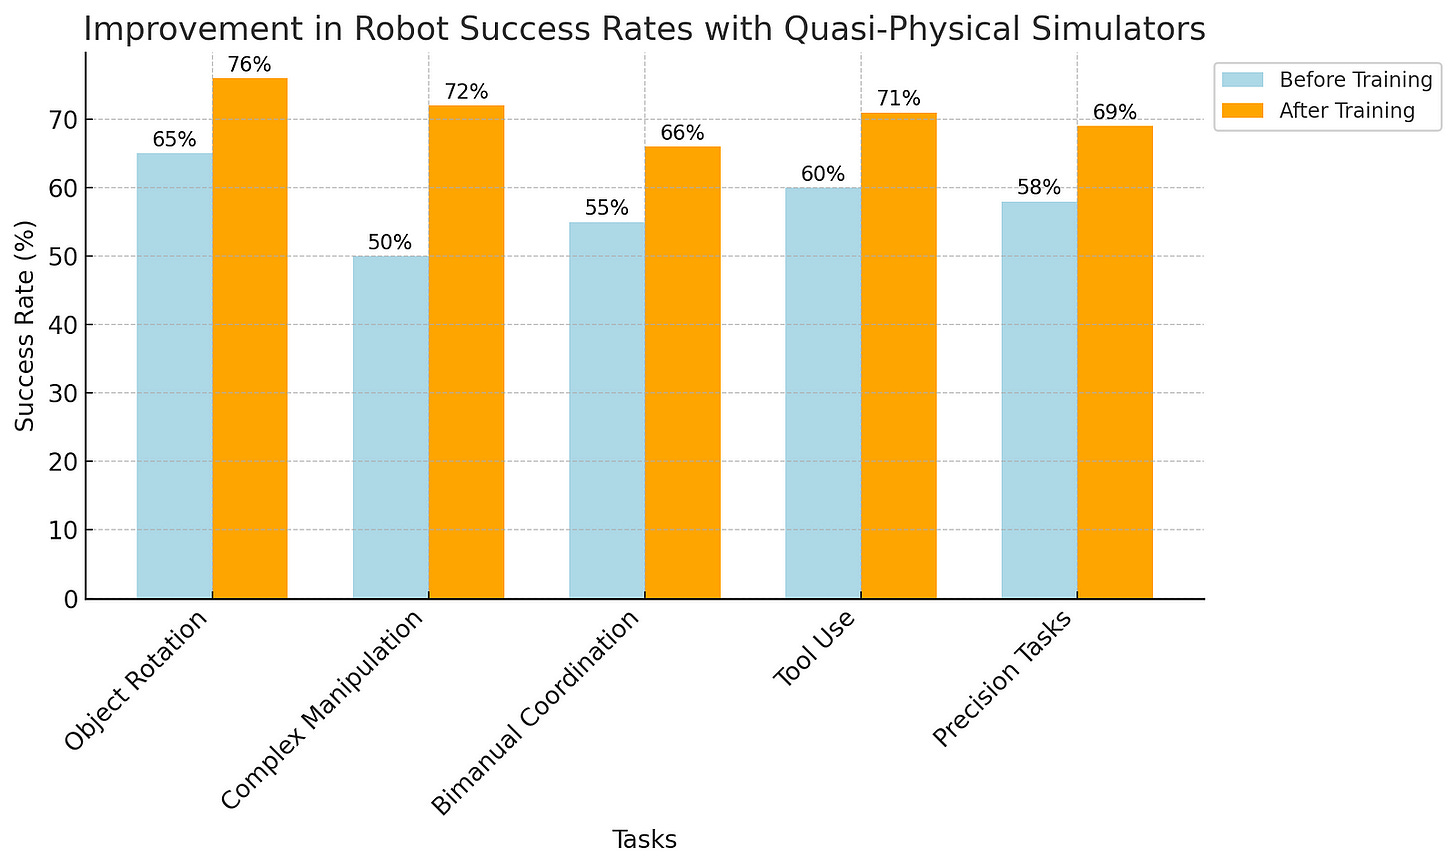 Bar graph showing the improvement in robot success rates across five tasks after training with quasi-physical simulators. Success rates are compared before and after training for tasks such as object rotation, complex manipulation, bimanual coordination, tool use, and precision tasks. The graph uses light blue bars to represent success rates before training and orange bars for after training, with numerical percentages shown above each bar.